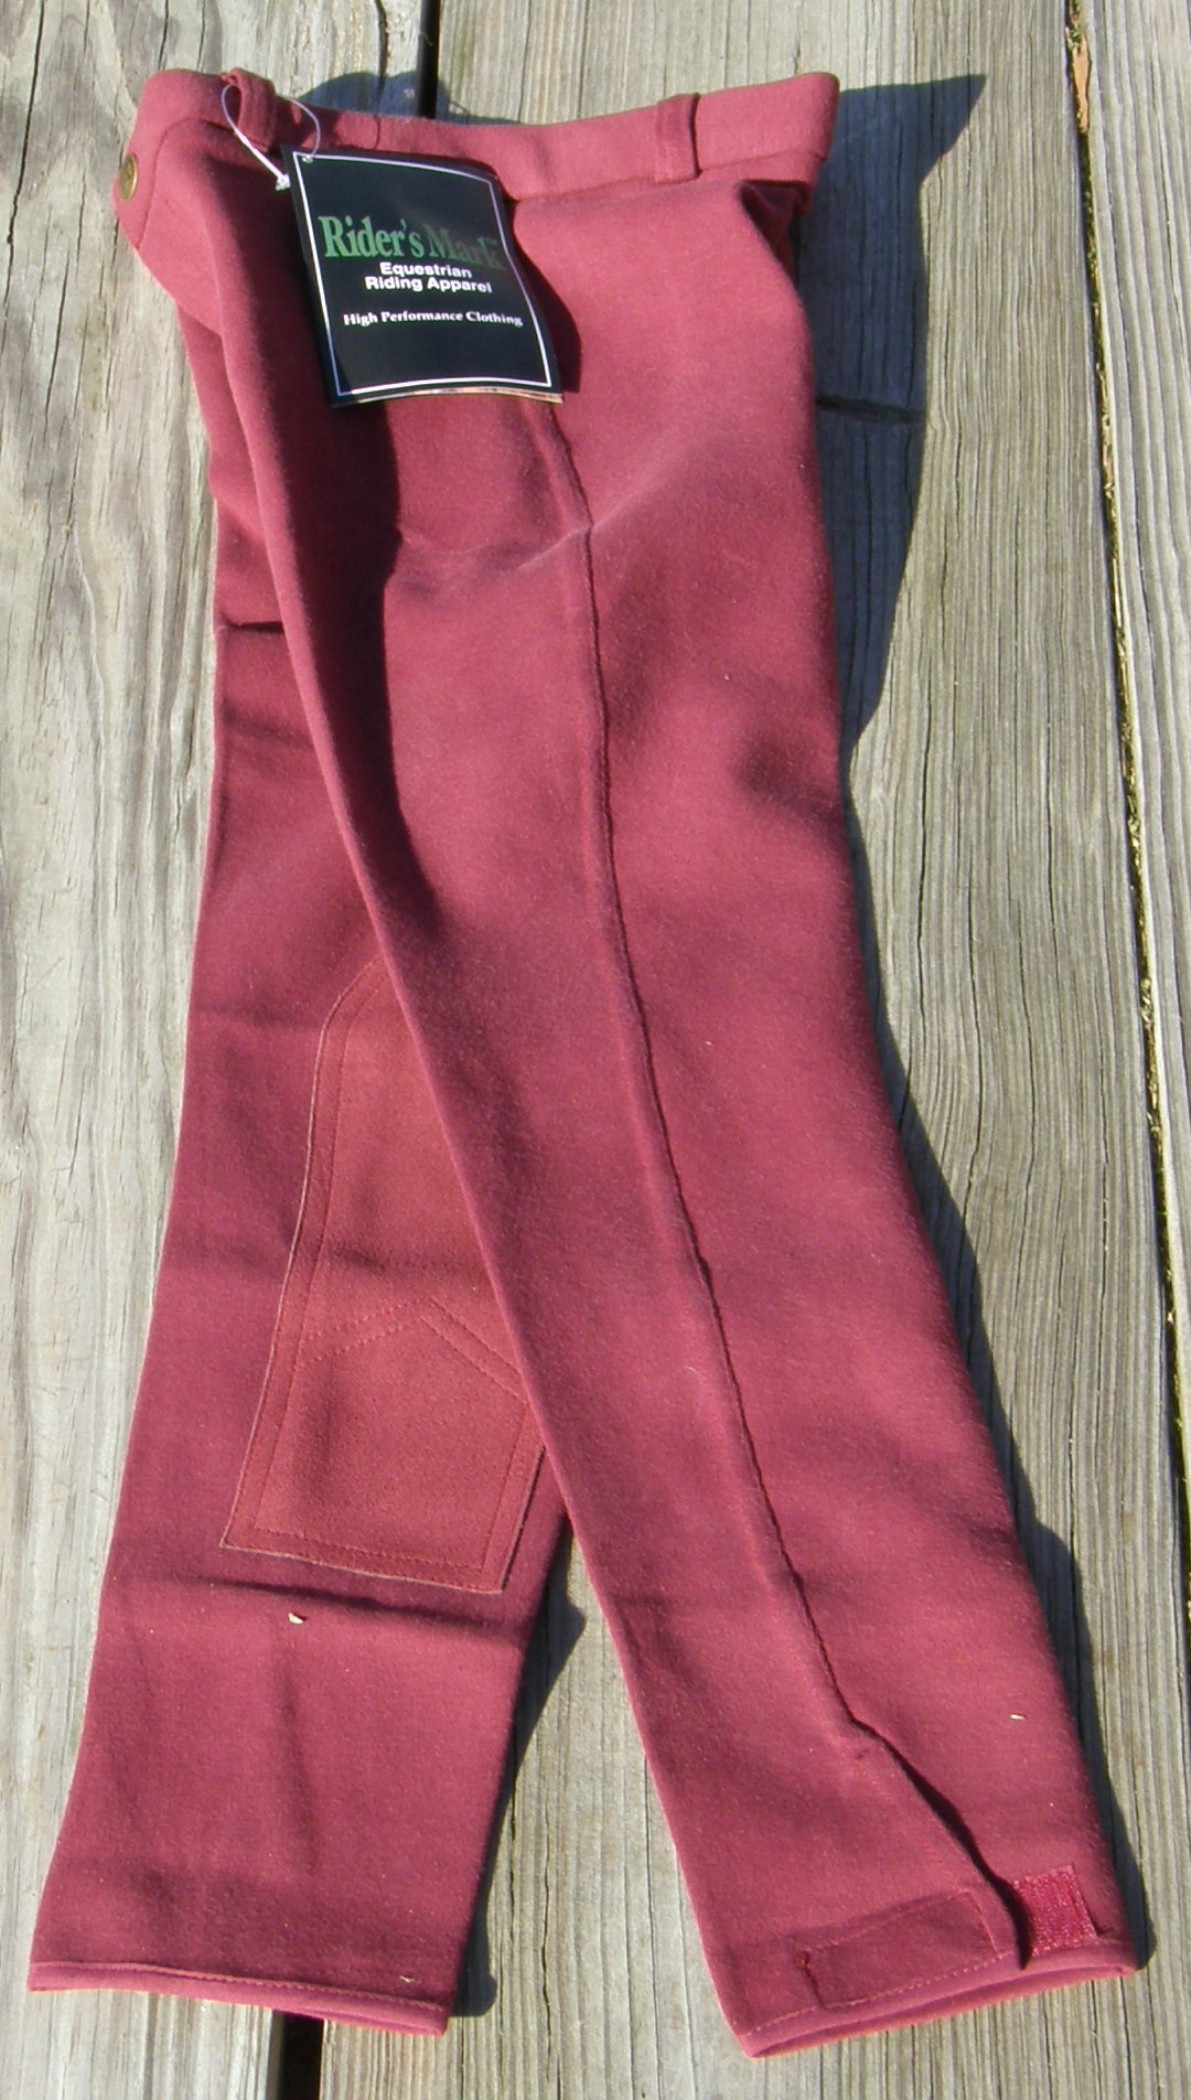 Riders Mark Knee Patch English Breeches Riding Pants Childs Sizes 6 10 12 16 Burgundy